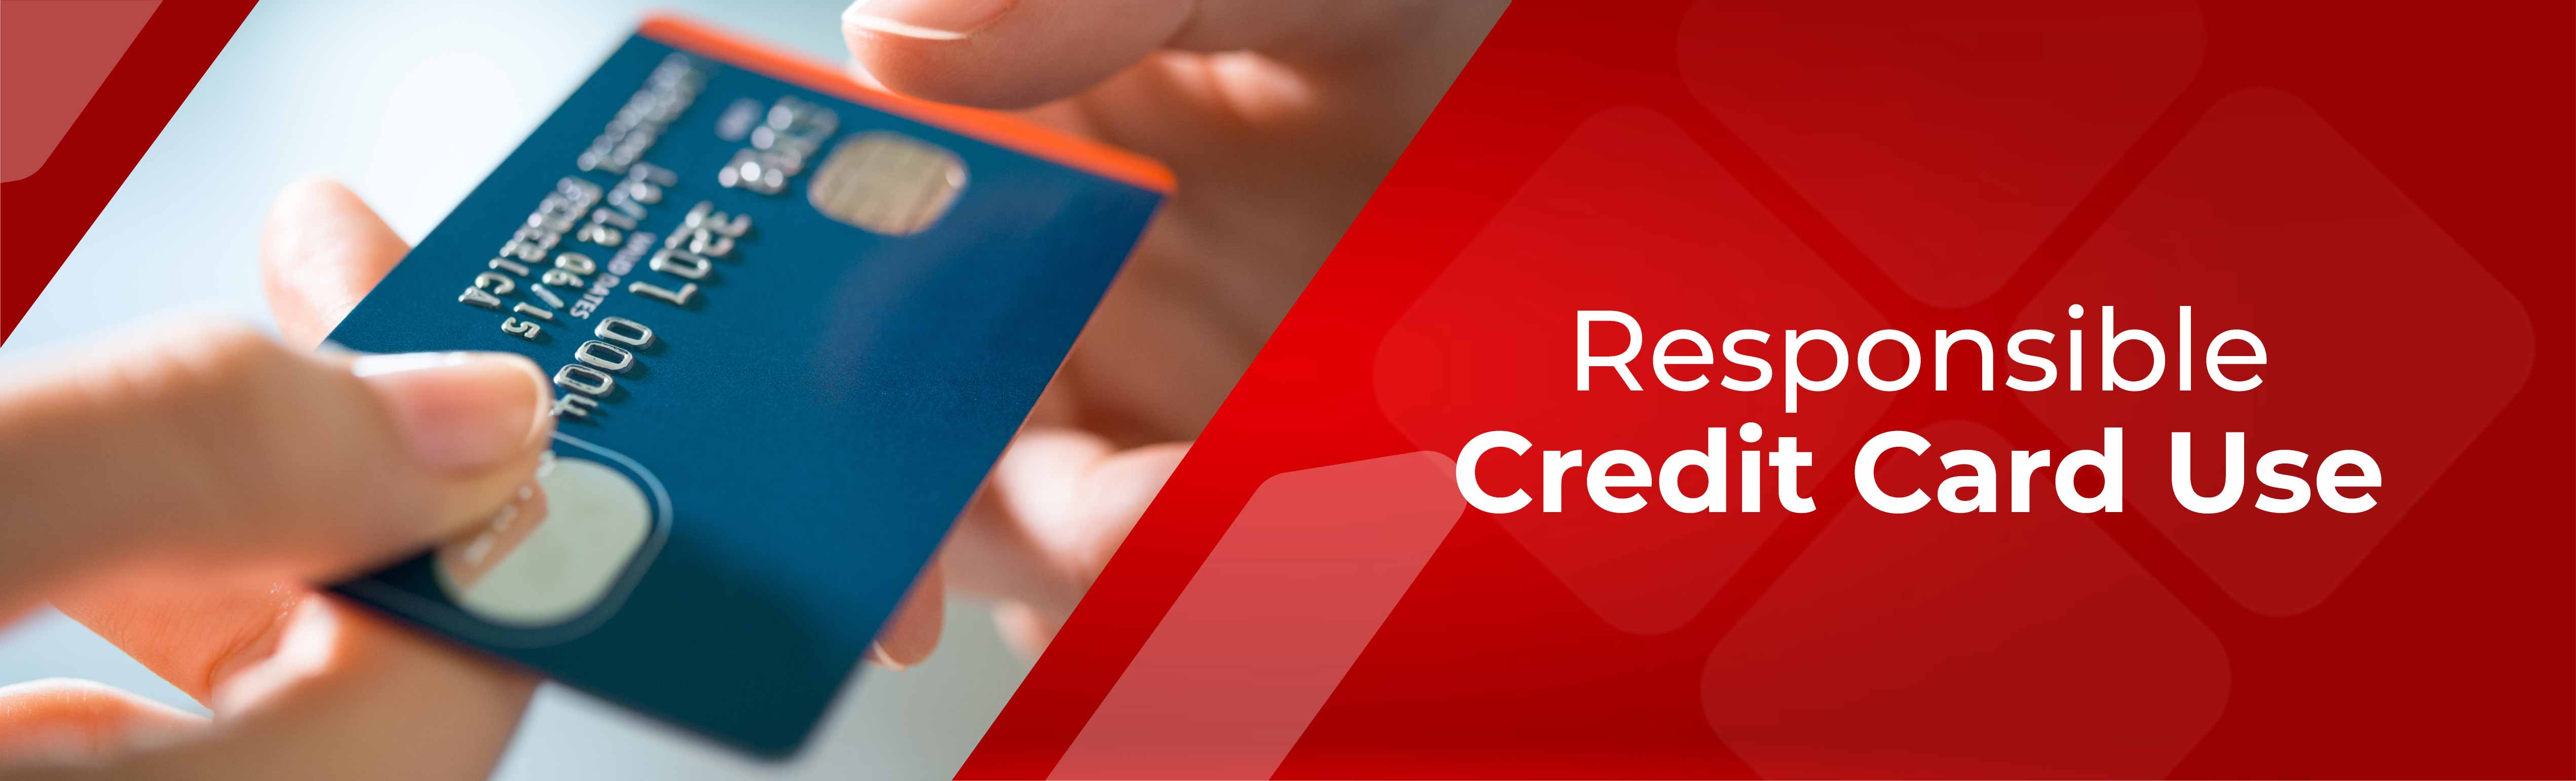 Responsible credit card use - close up of a person handing another person a credit card